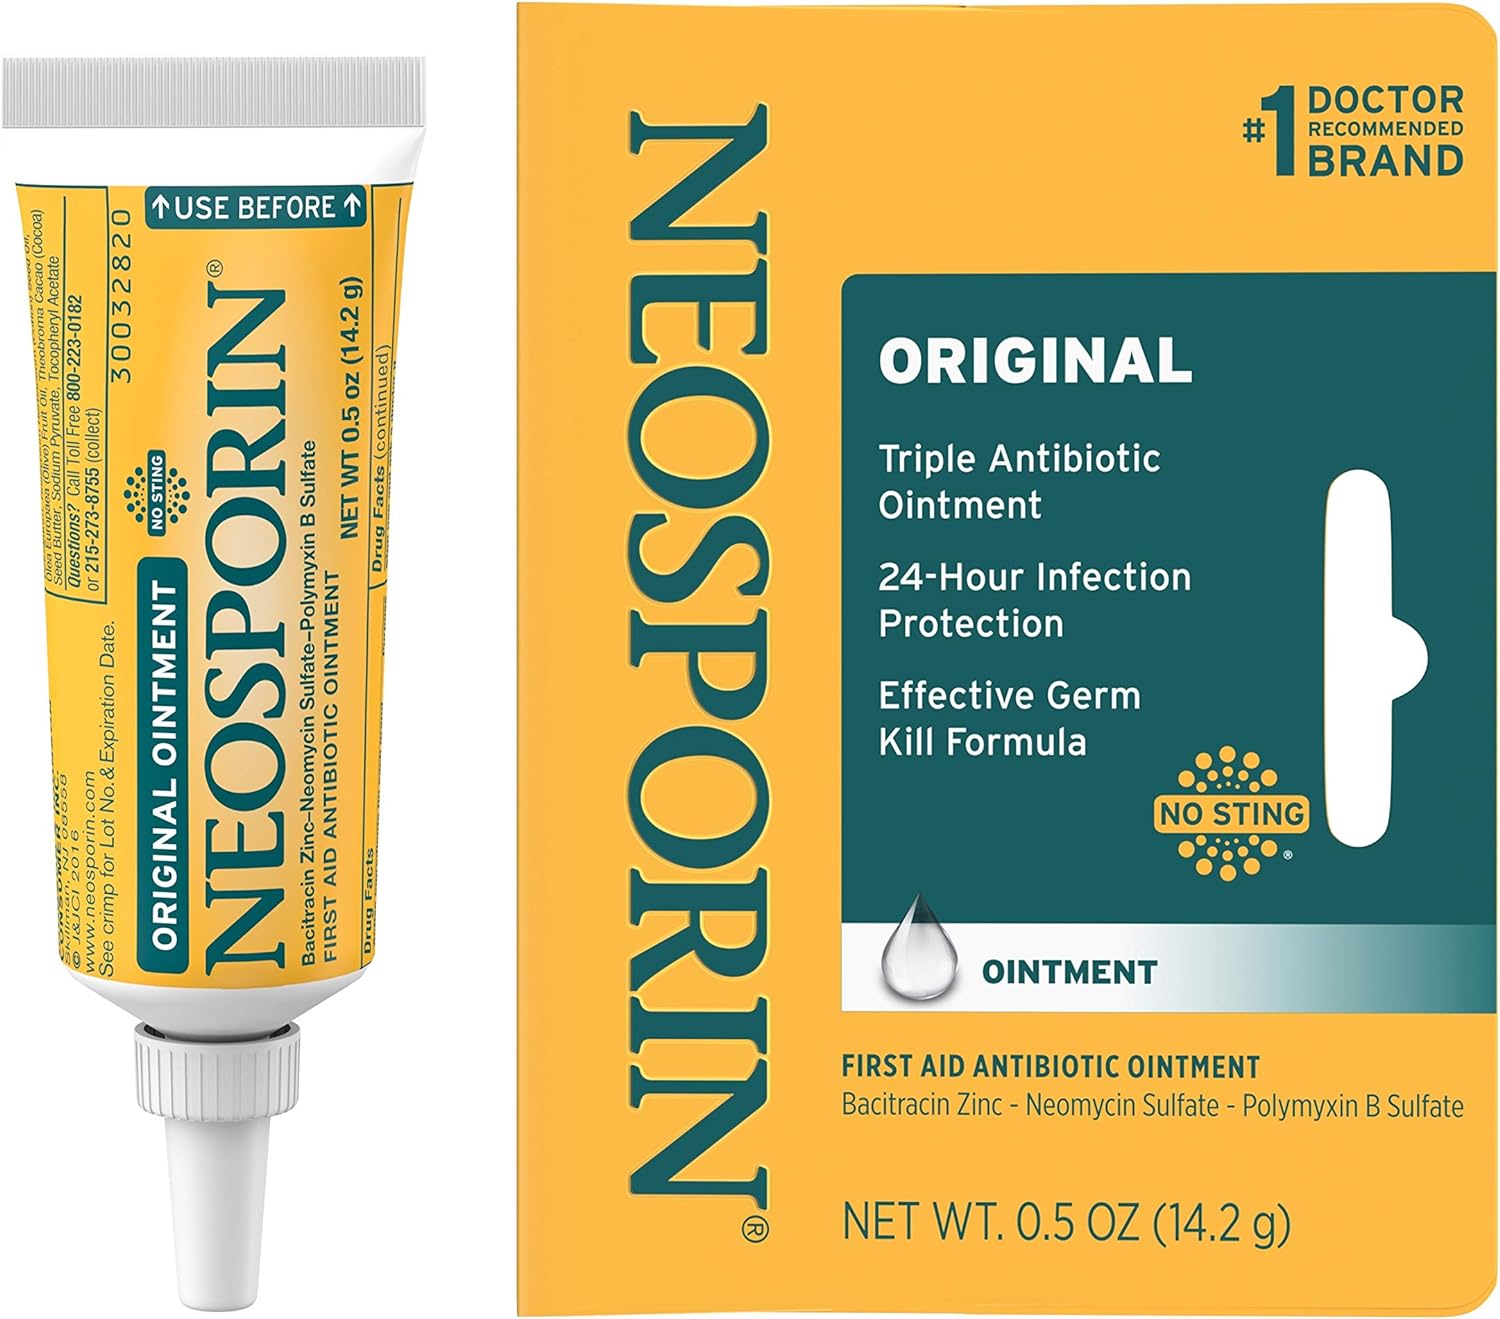 Neosporin Original First Aid Antibiotic Ointment with Bacitracin Zinc, 0.5 oz [Subscribe & Save] $2.53